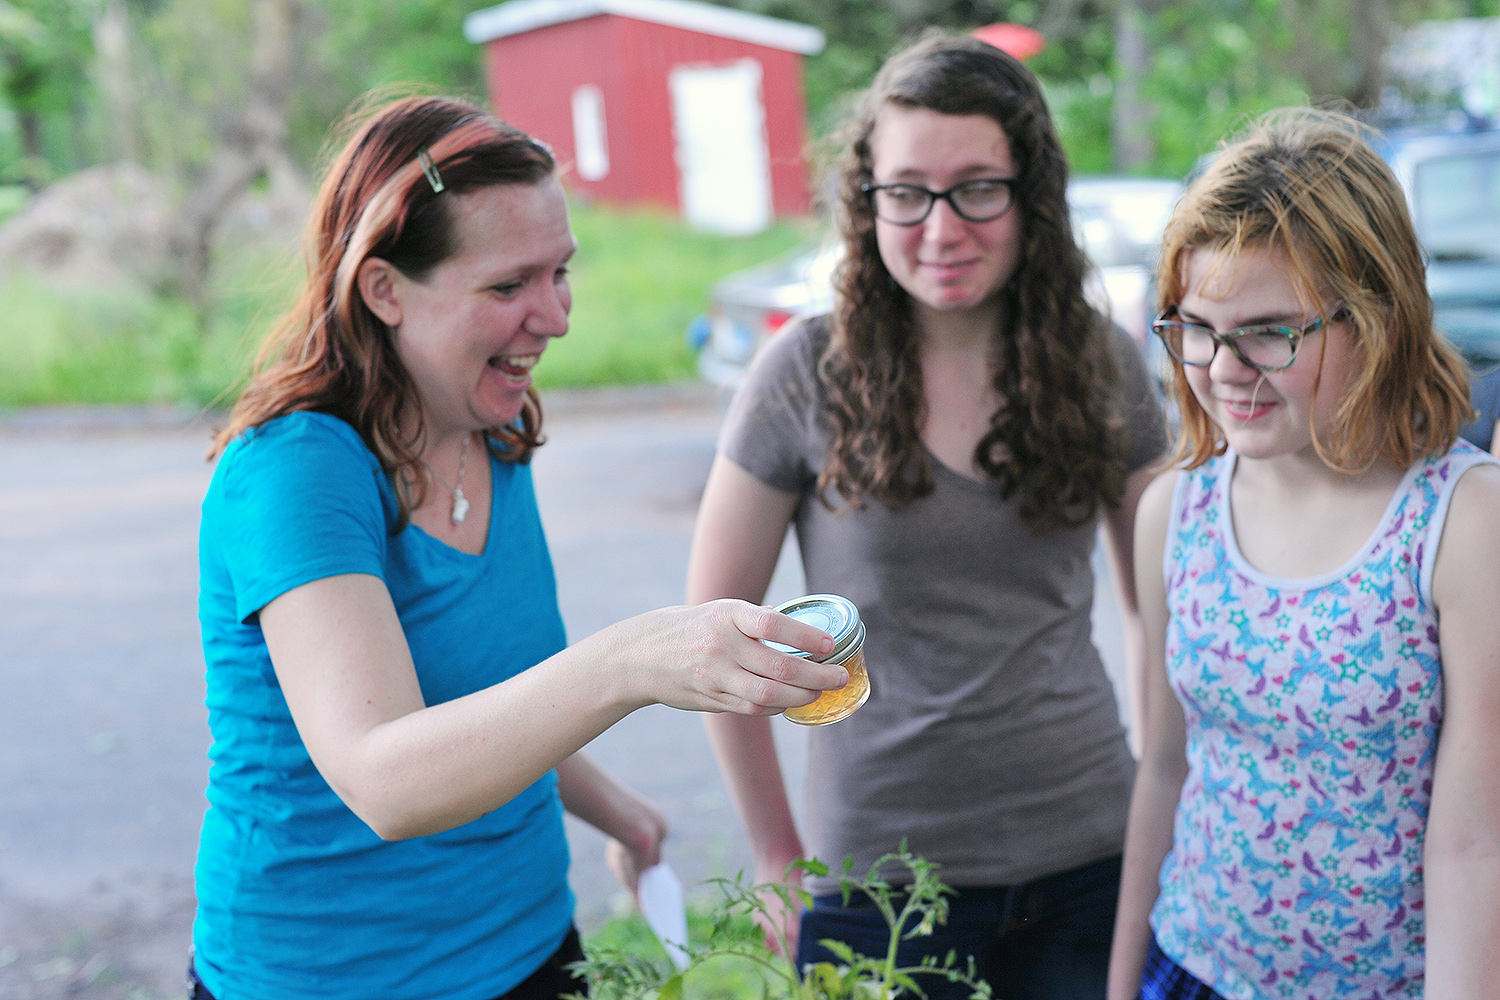 Anika Dane, administrative assistant for the Molecular Biology and Biochemistry Department, shops for dandelion jelly with her daughters, Kerste and Aeris. "Aeris confirms the jelly tastes like honey," Dane said. 